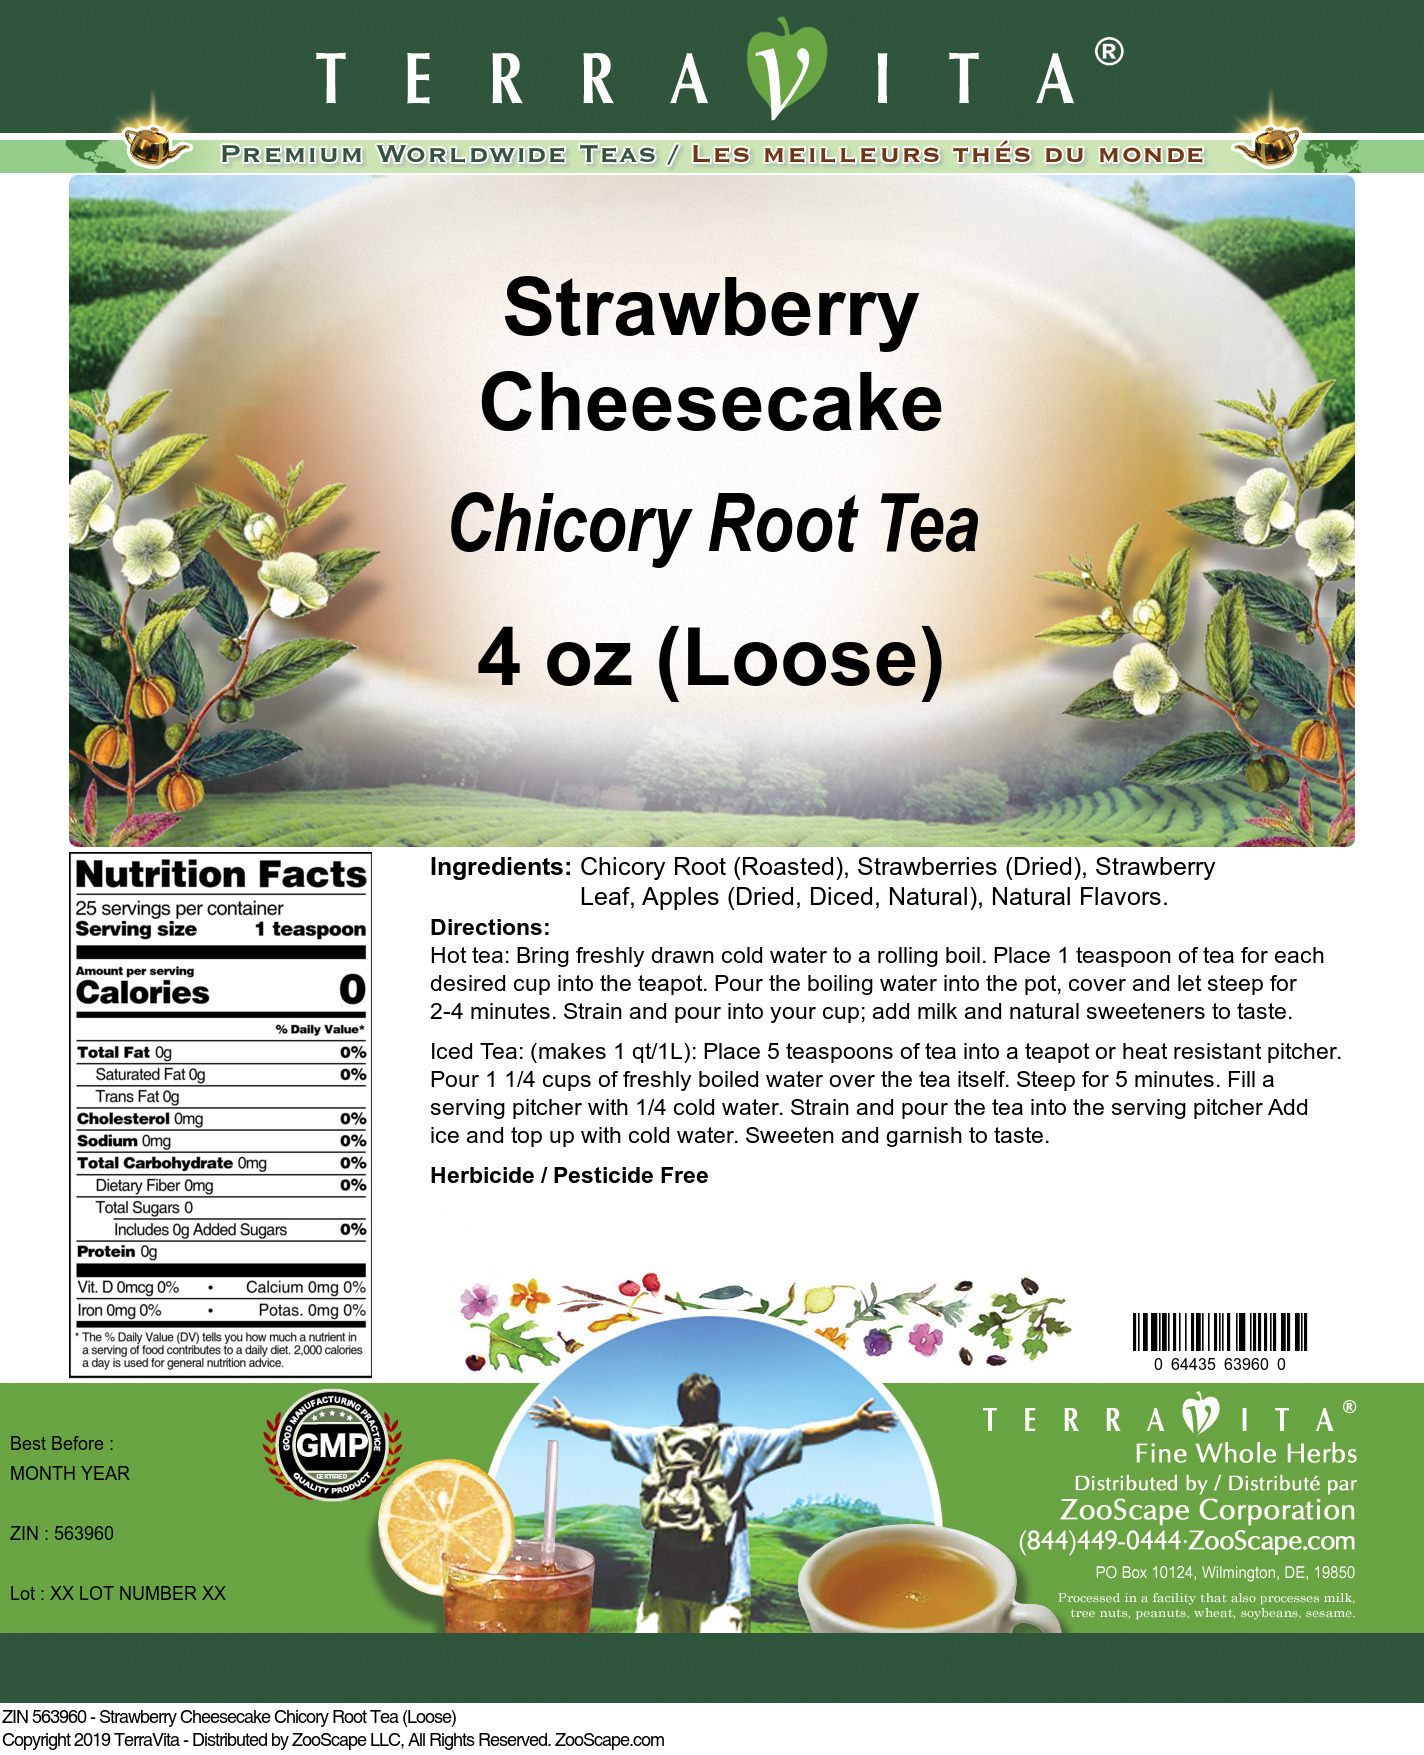 Strawberry Cheesecake Chicory Root Tea (Loose) - Label